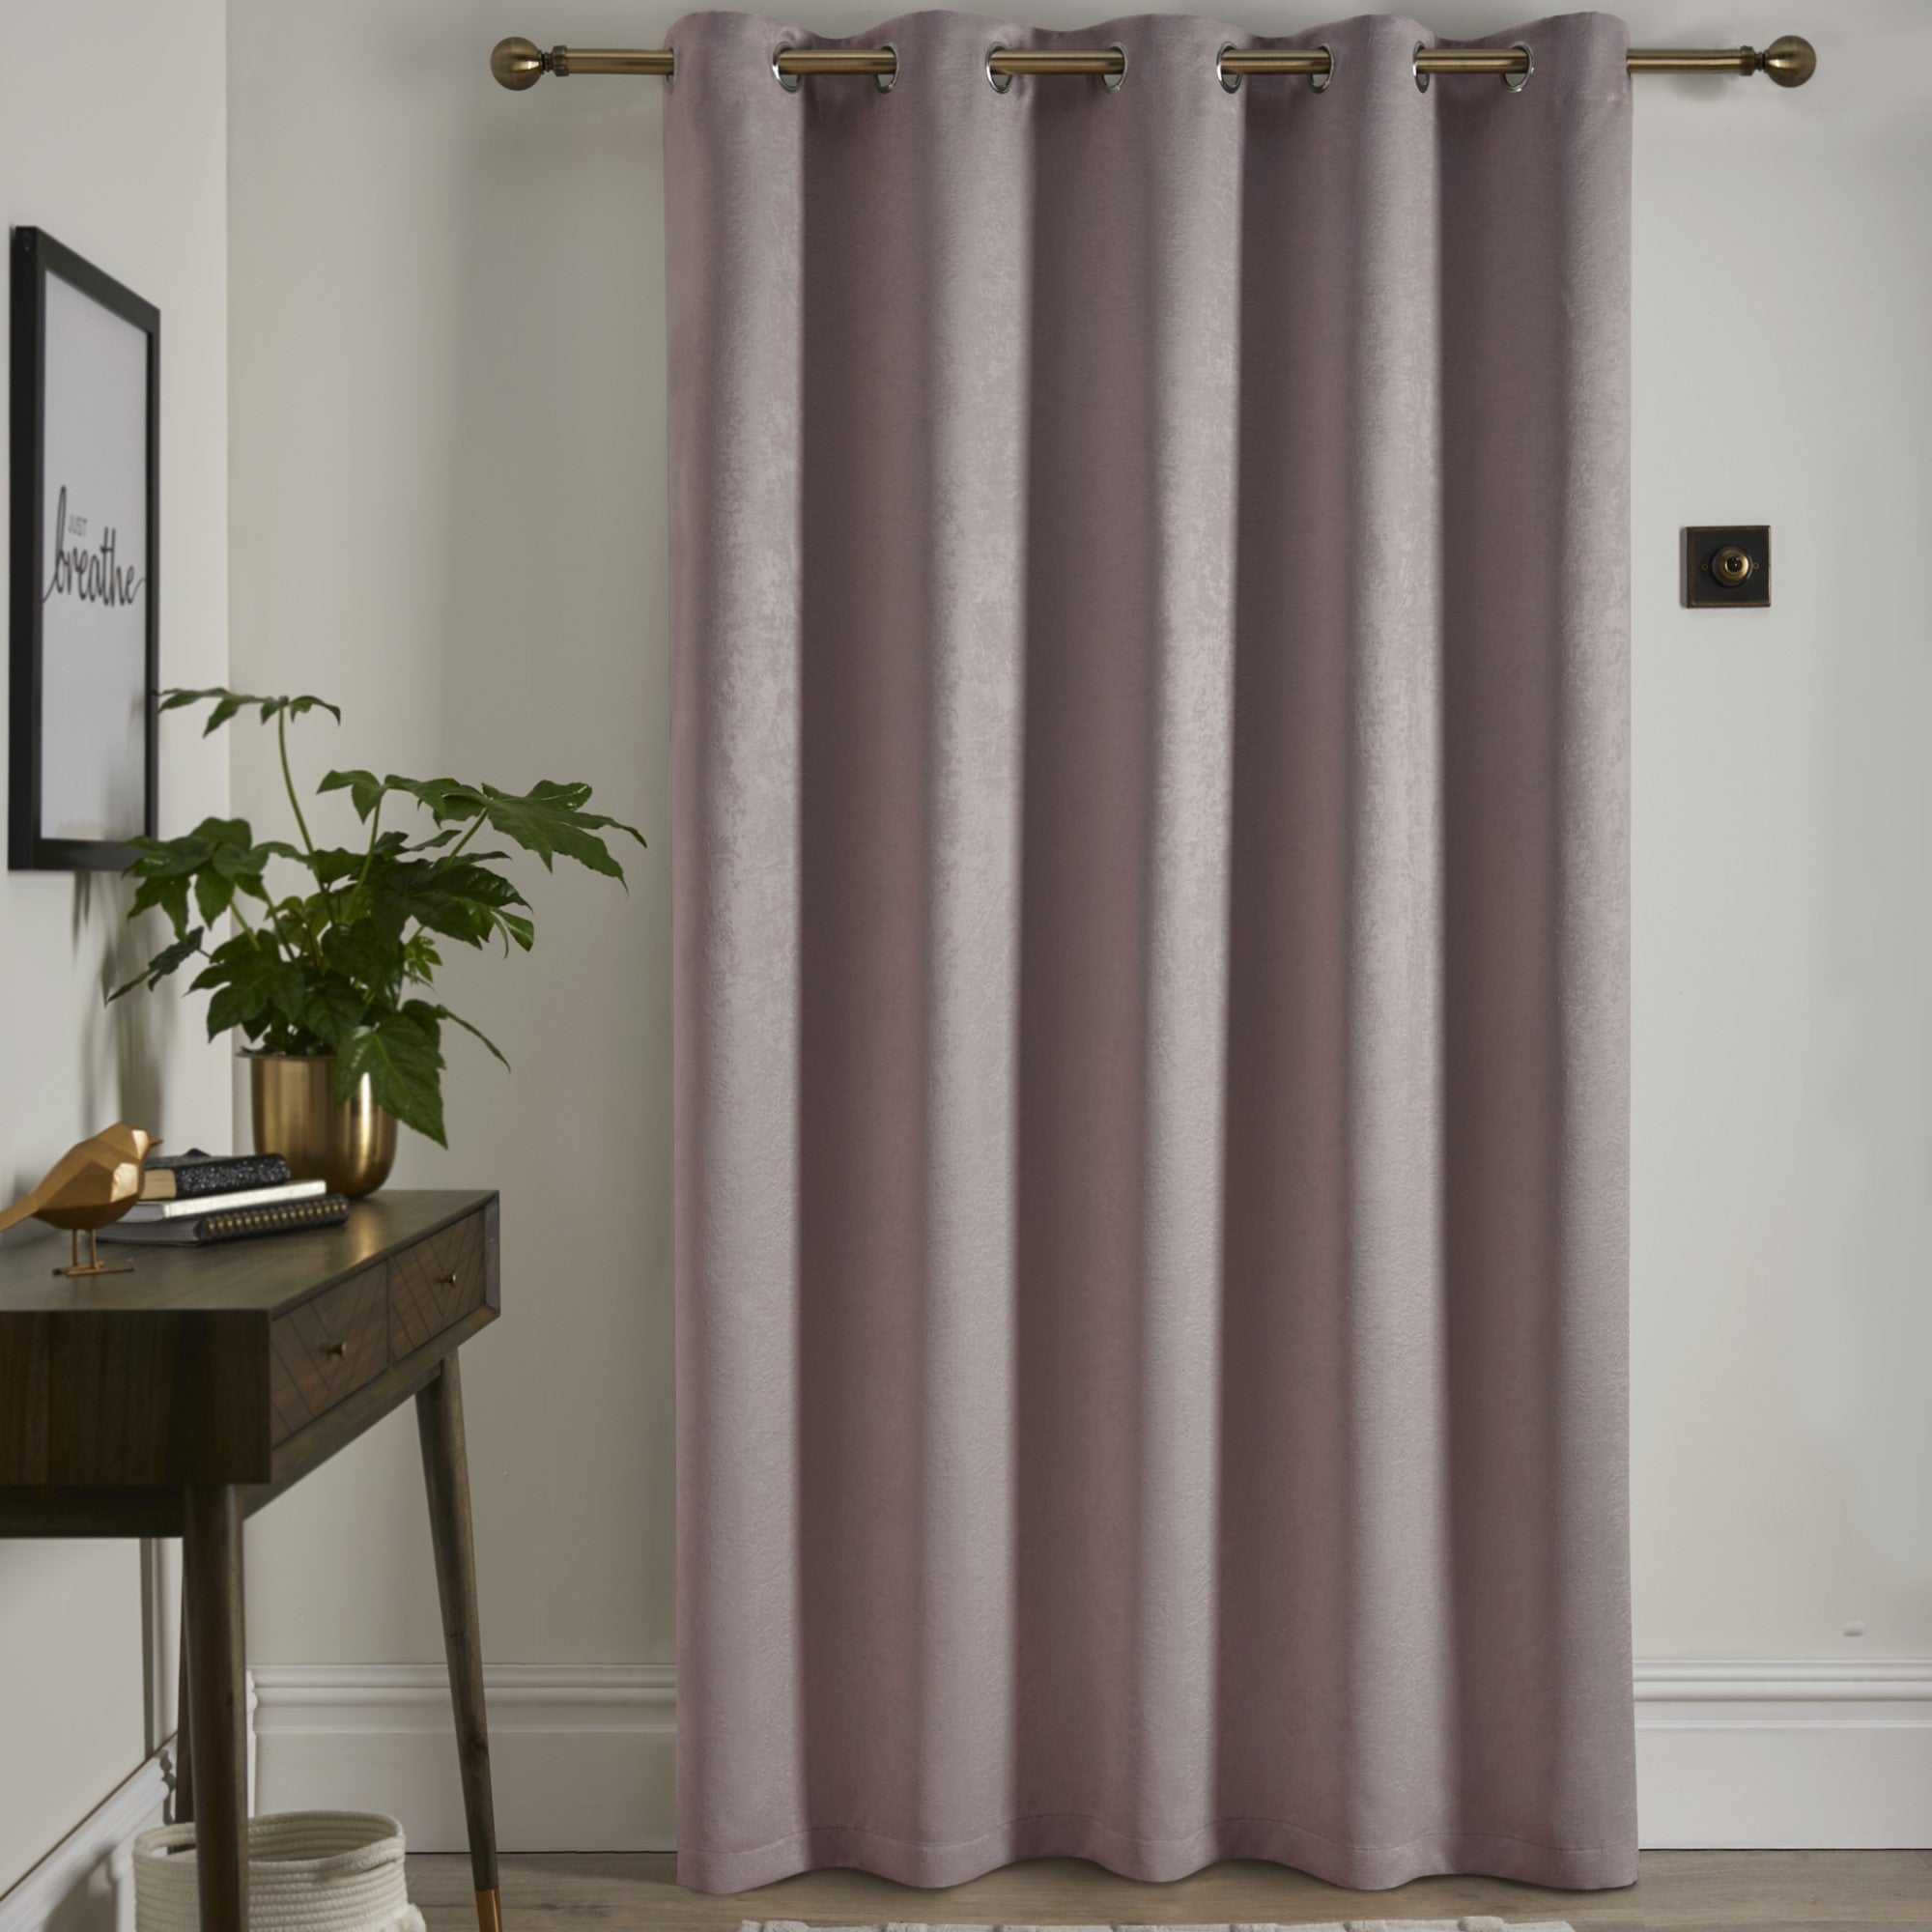 Eyelet Single Panel Door Curtain Strata by Fusion in Blush